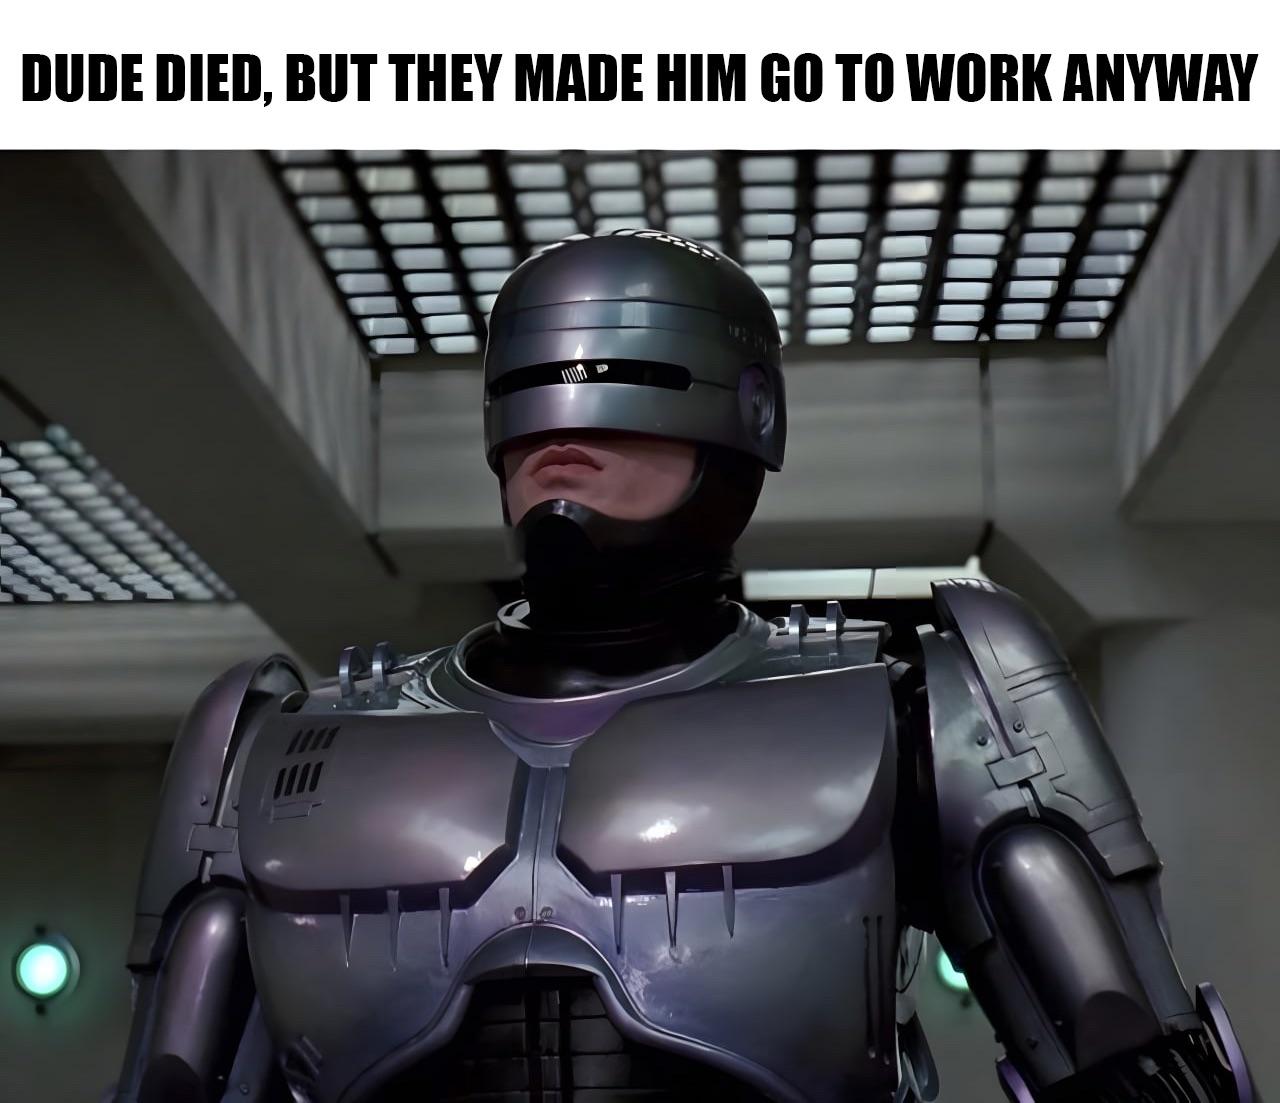 dank memes - serve the public trust protect the innocent uphold the law - Dude Died, But They Made Him Go To Work Anyway